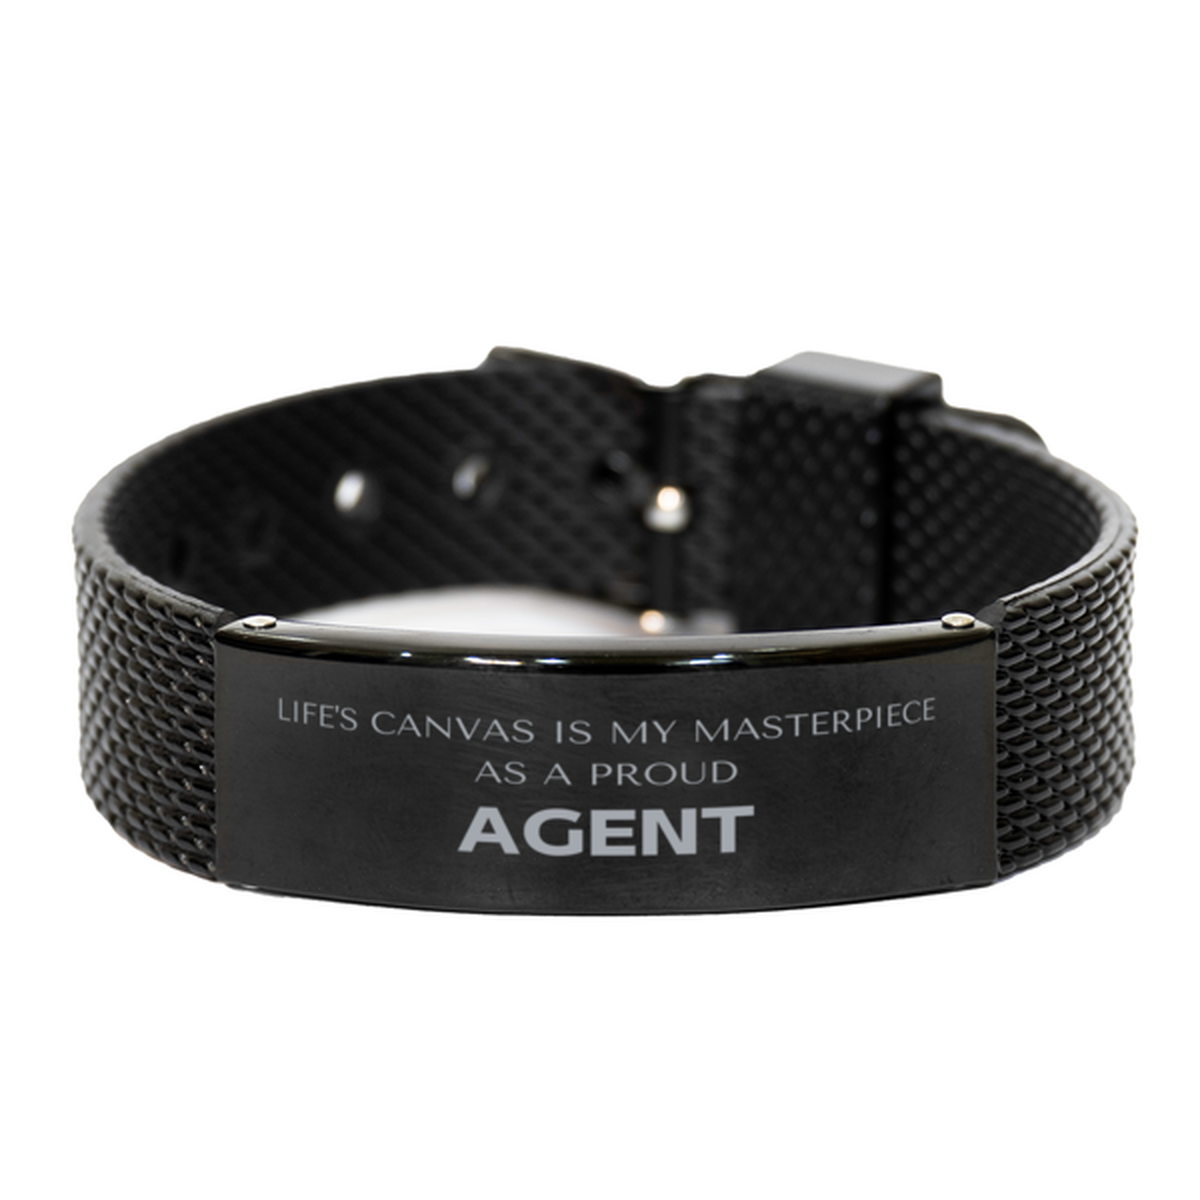 Proud Agent Gifts, Life's canvas is my masterpiece, Epic Birthday Christmas Unique Black Shark Mesh Bracelet For Agent, Coworkers, Men, Women, Friends